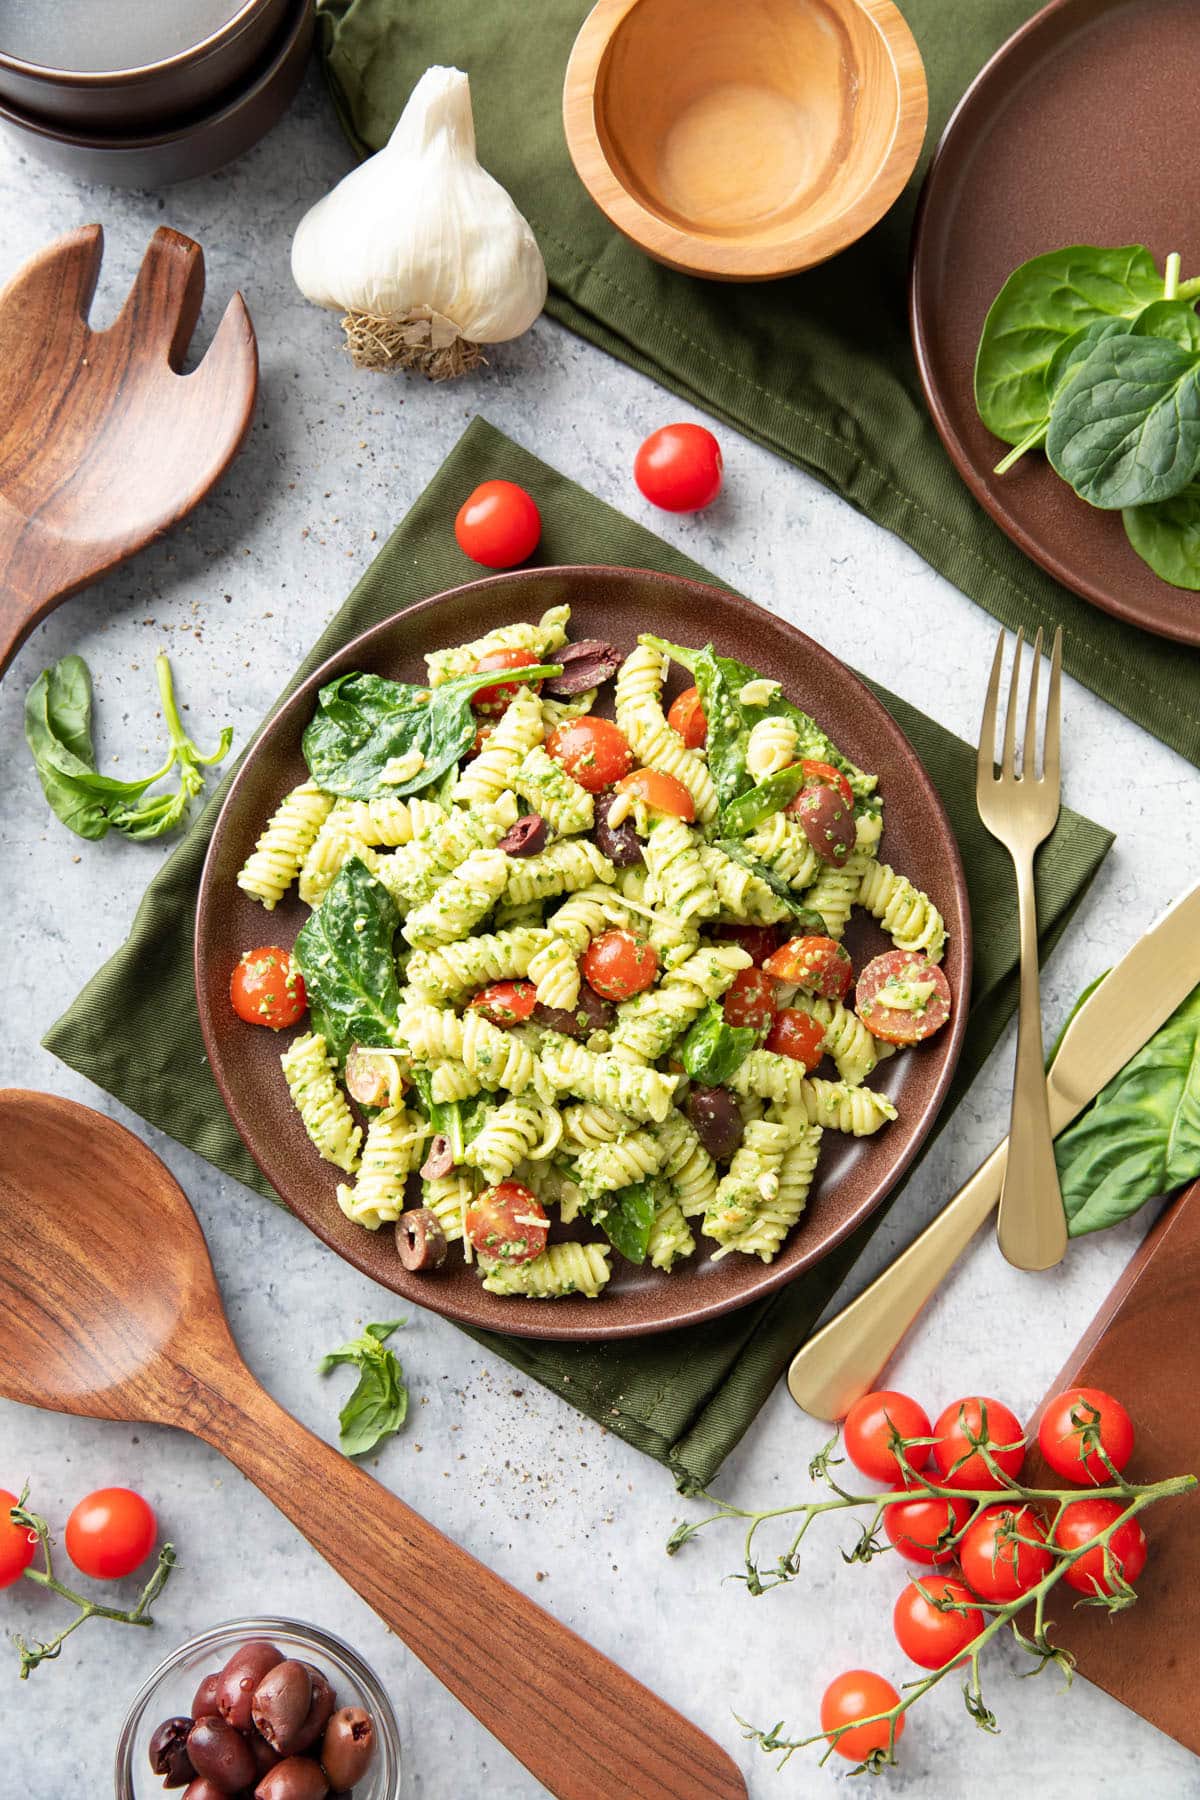 pesto pasta salad served in a brown plate